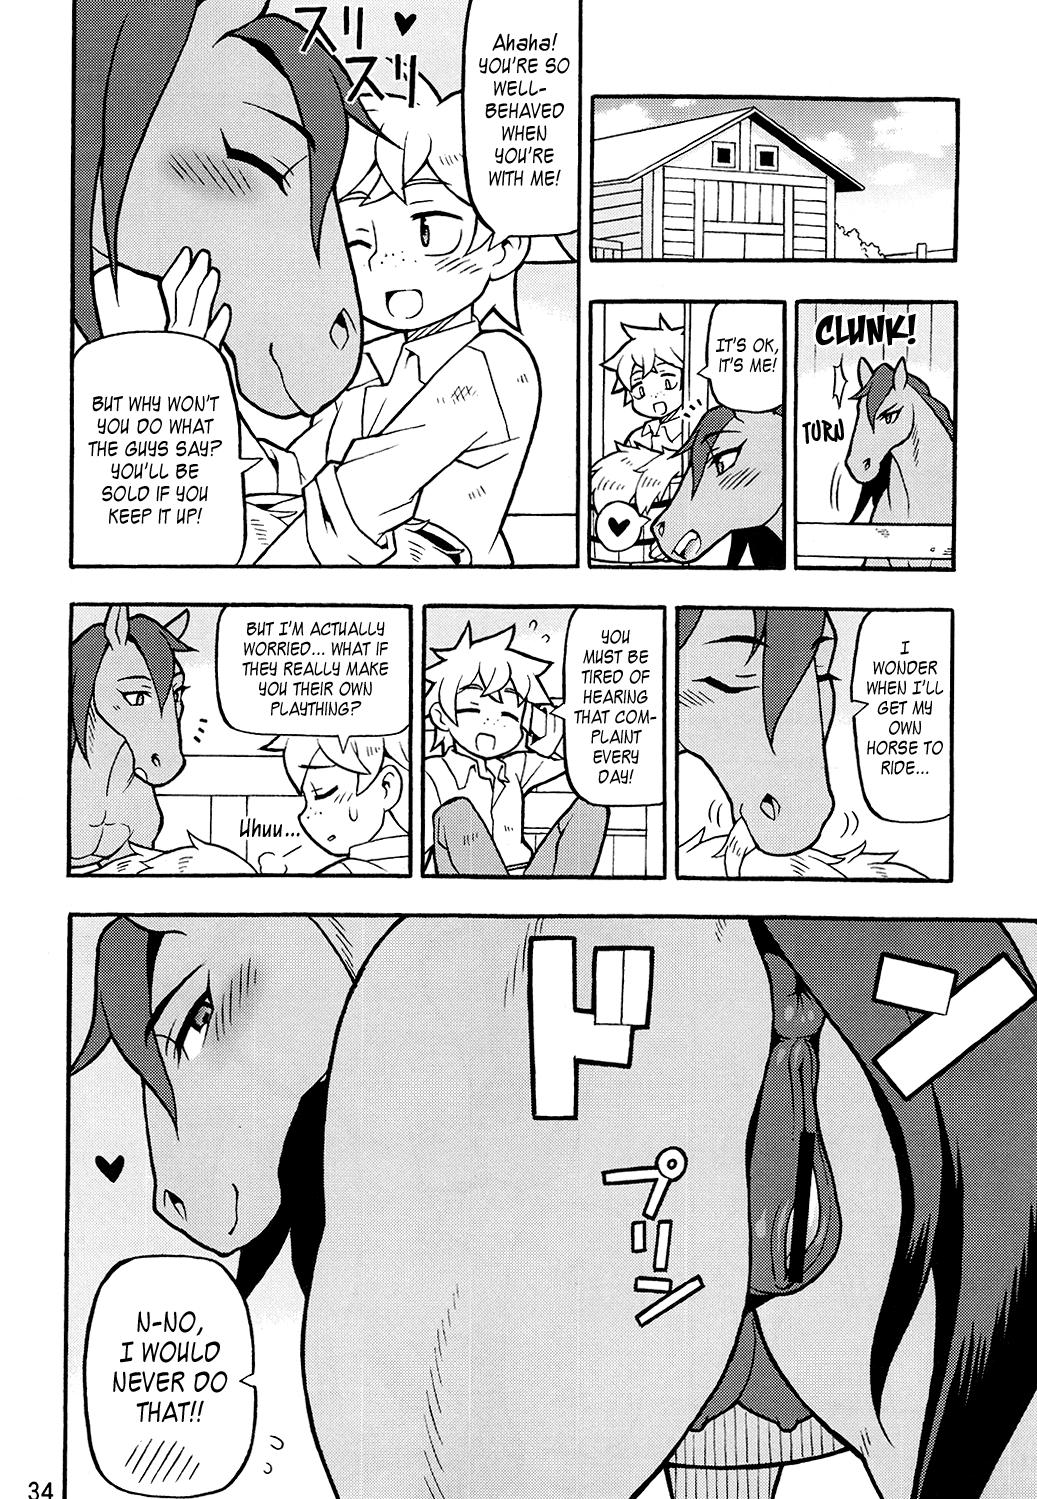 Innocent Mare Holic 4 Kemolover EX Ch. 4, 8, 10-11, 19 Spoon - Page 4